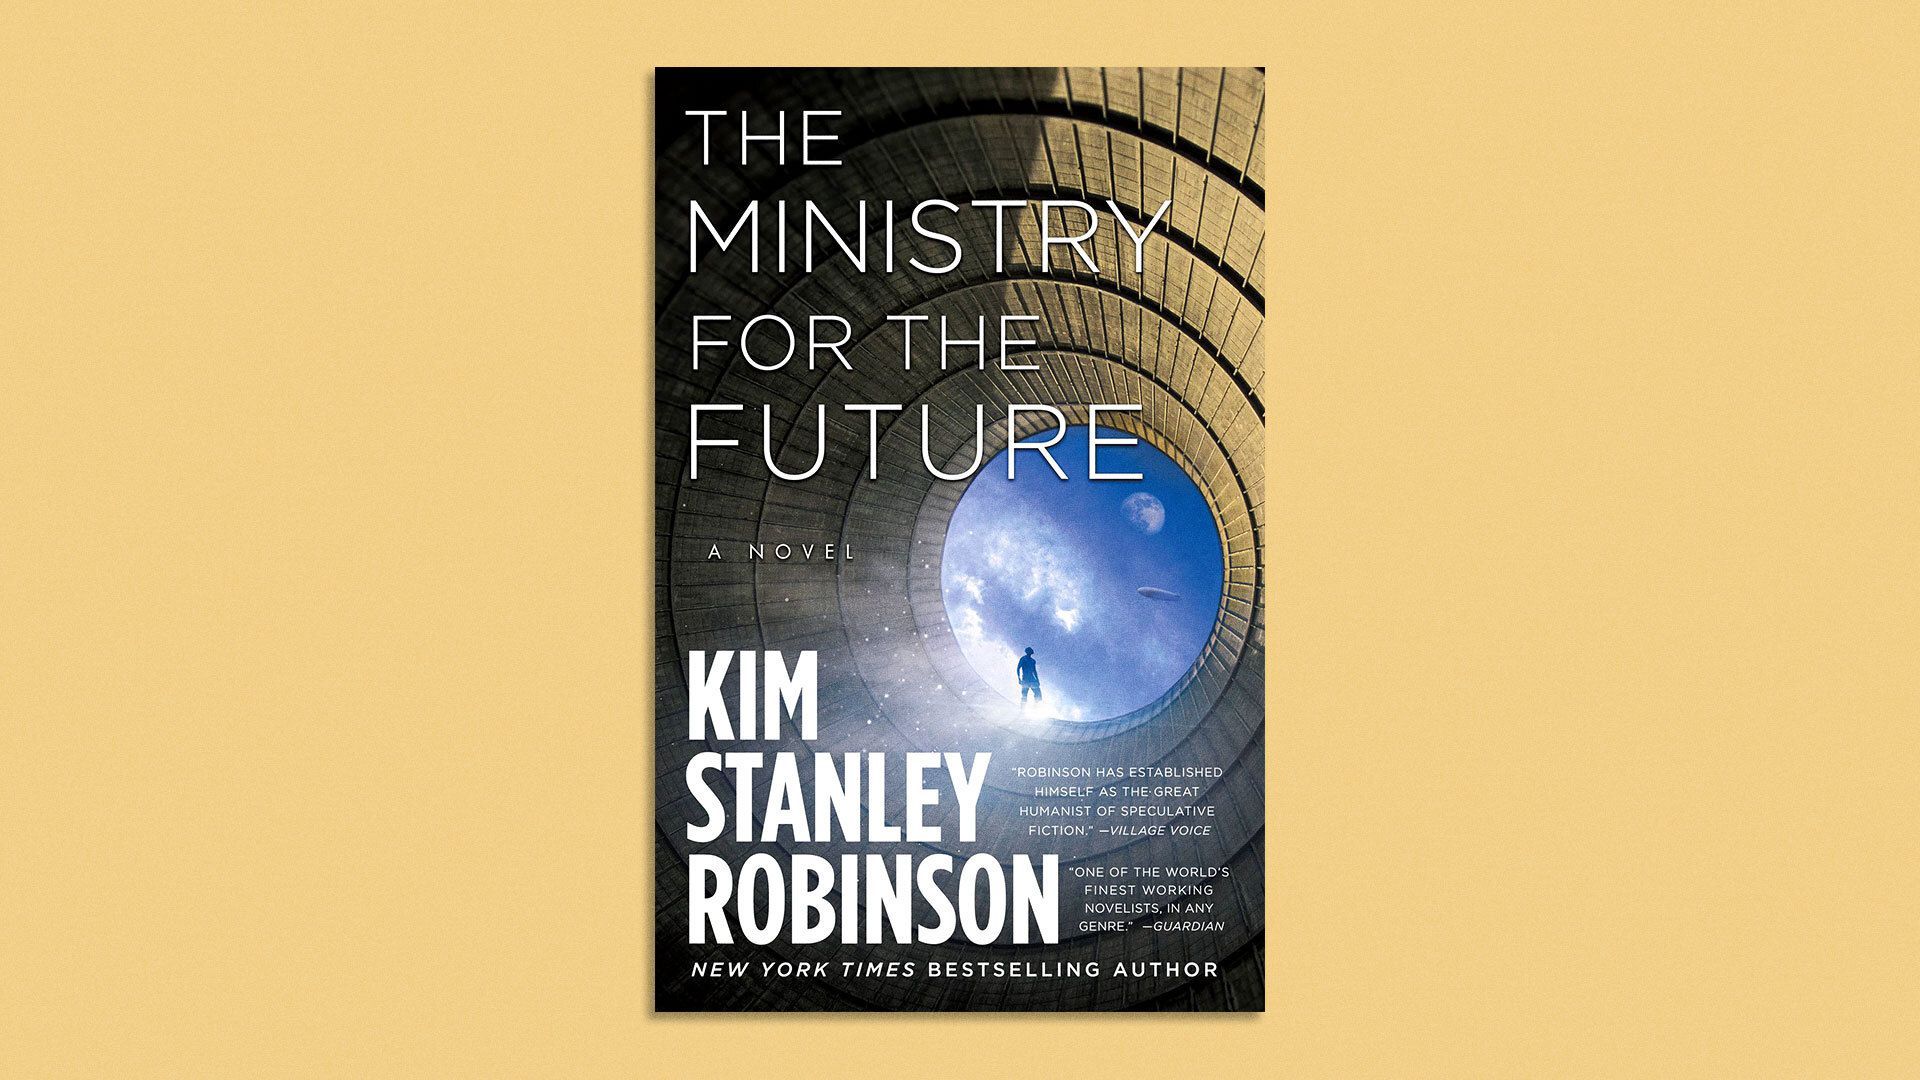 Photo illustration of the cover of "The Ministry for the Future" by Kim Stanley Robinson.